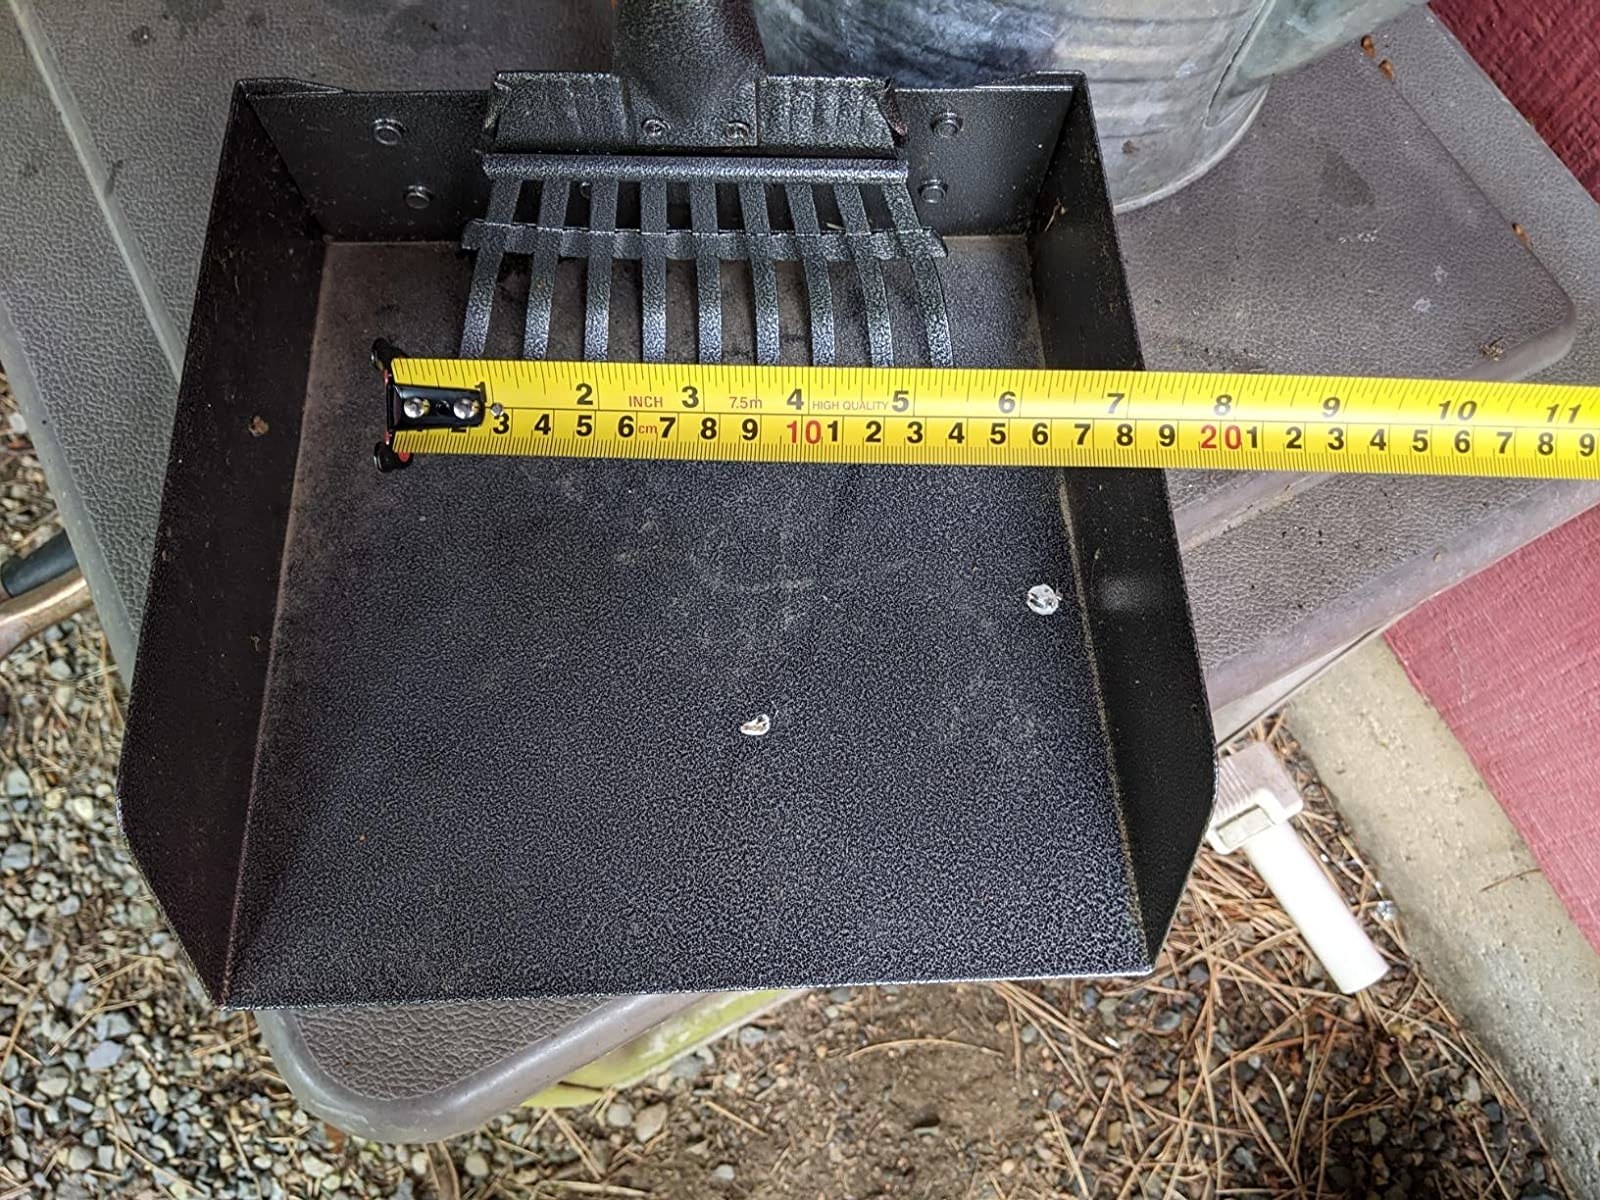 A reviewer demonstrating the size of the rake and tray with a tape-measure